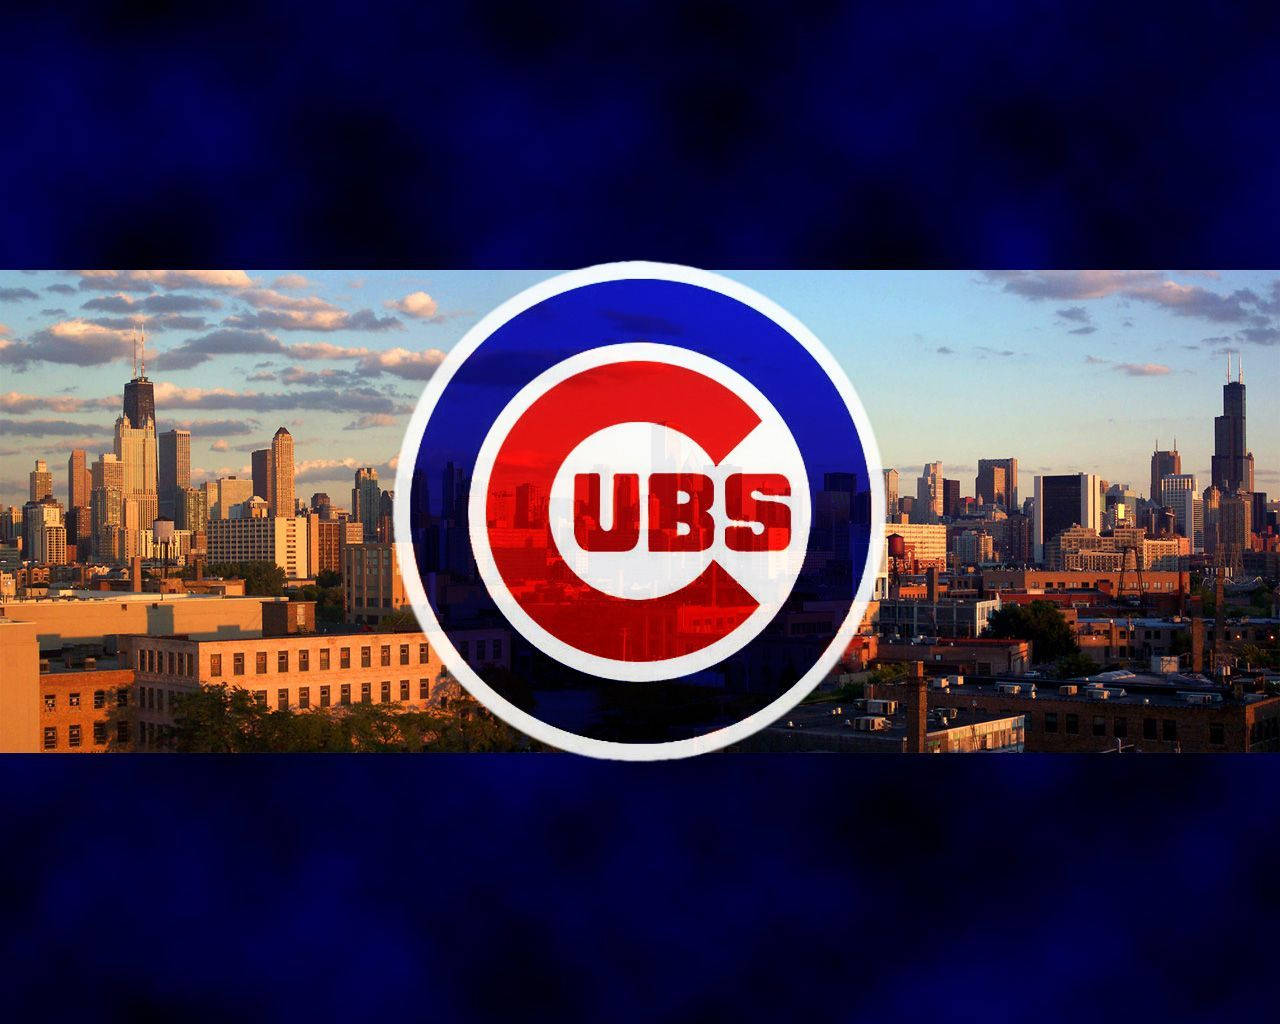 Chicago Cubs On City Buildings Wallpaper